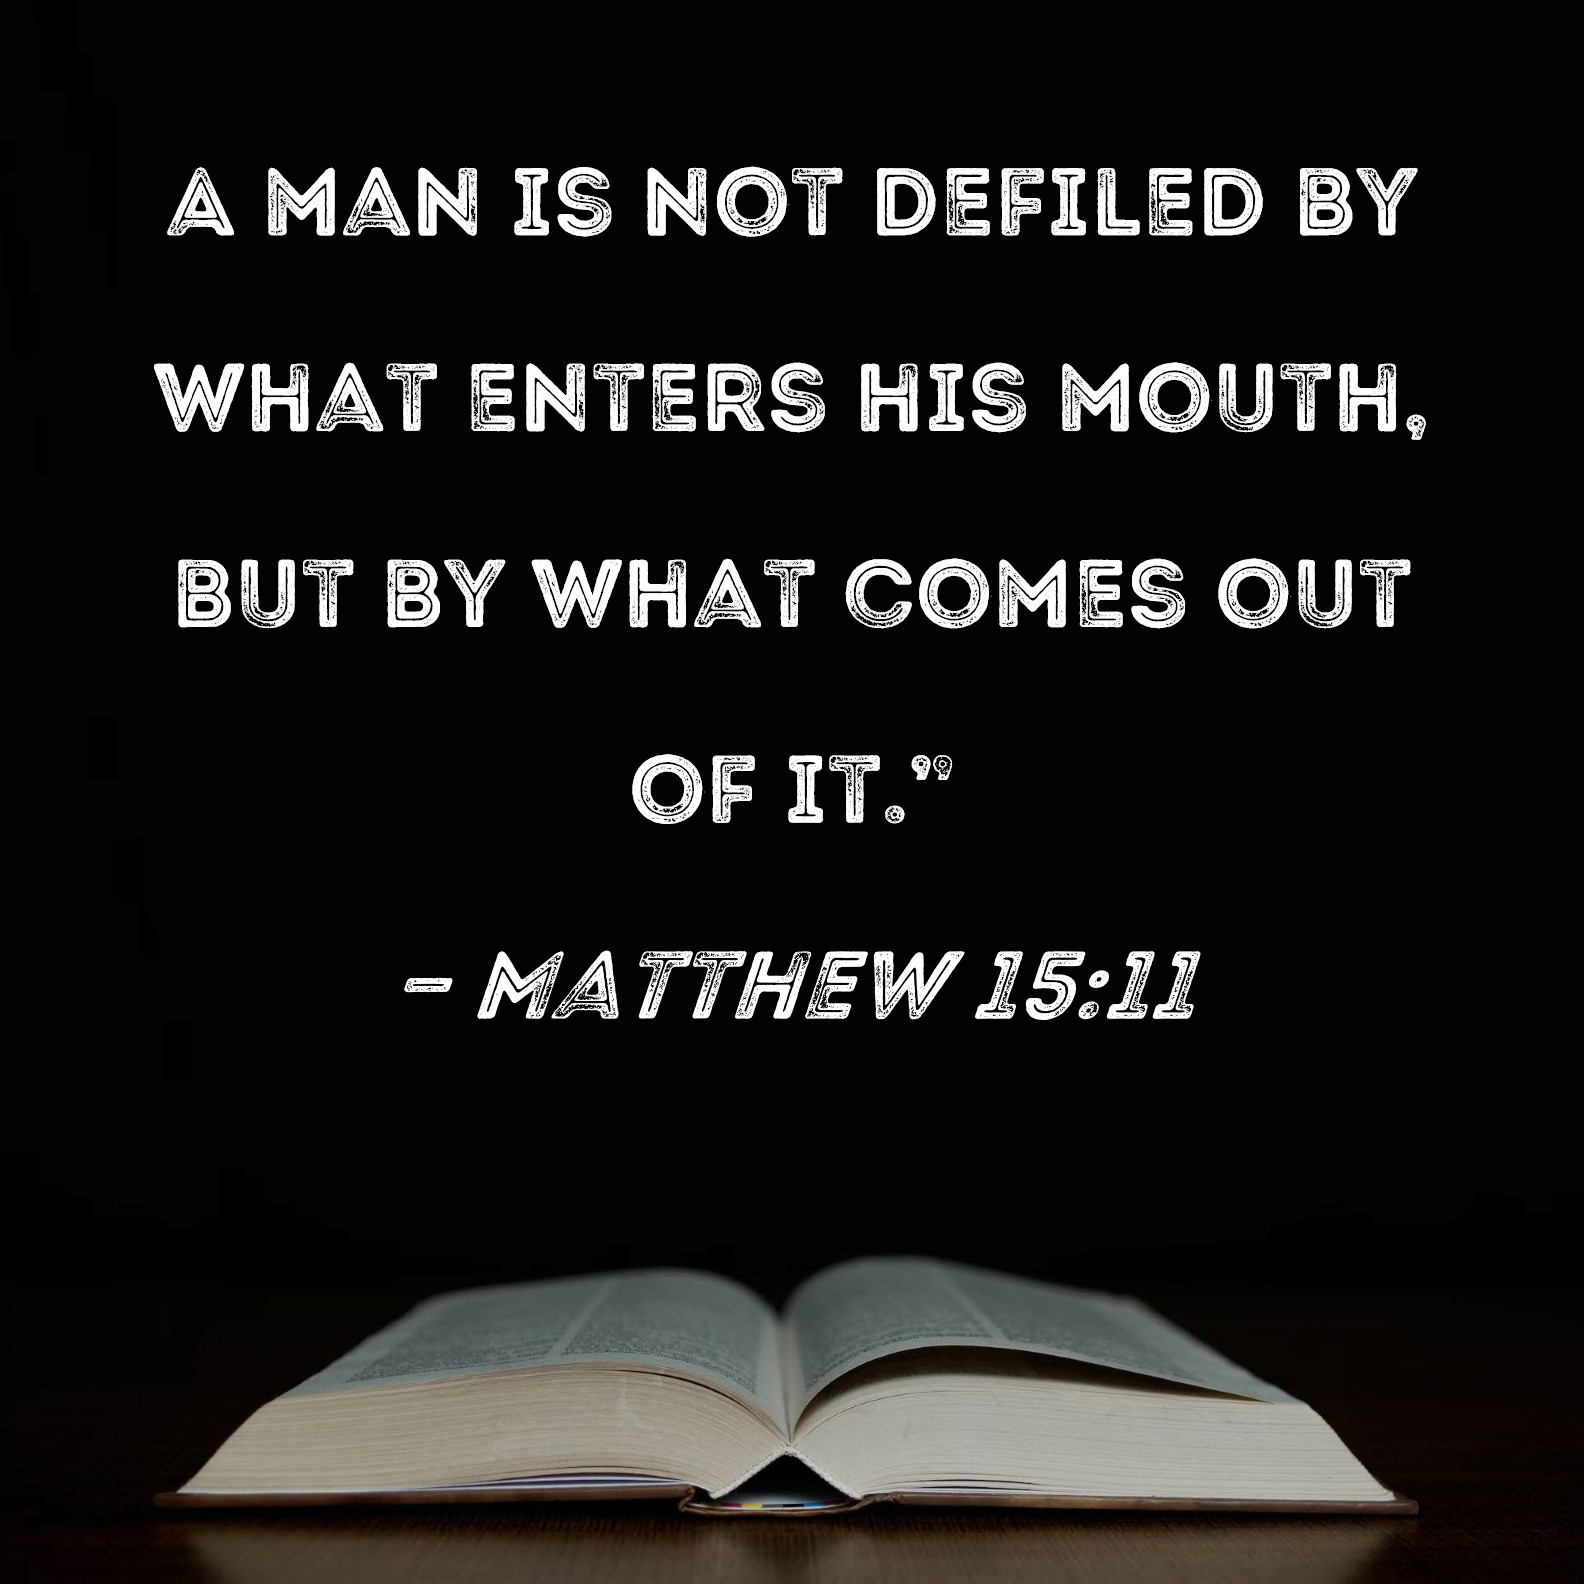 matthew-15-11-a-man-is-not-defiled-by-what-enters-his-mouth-but-by